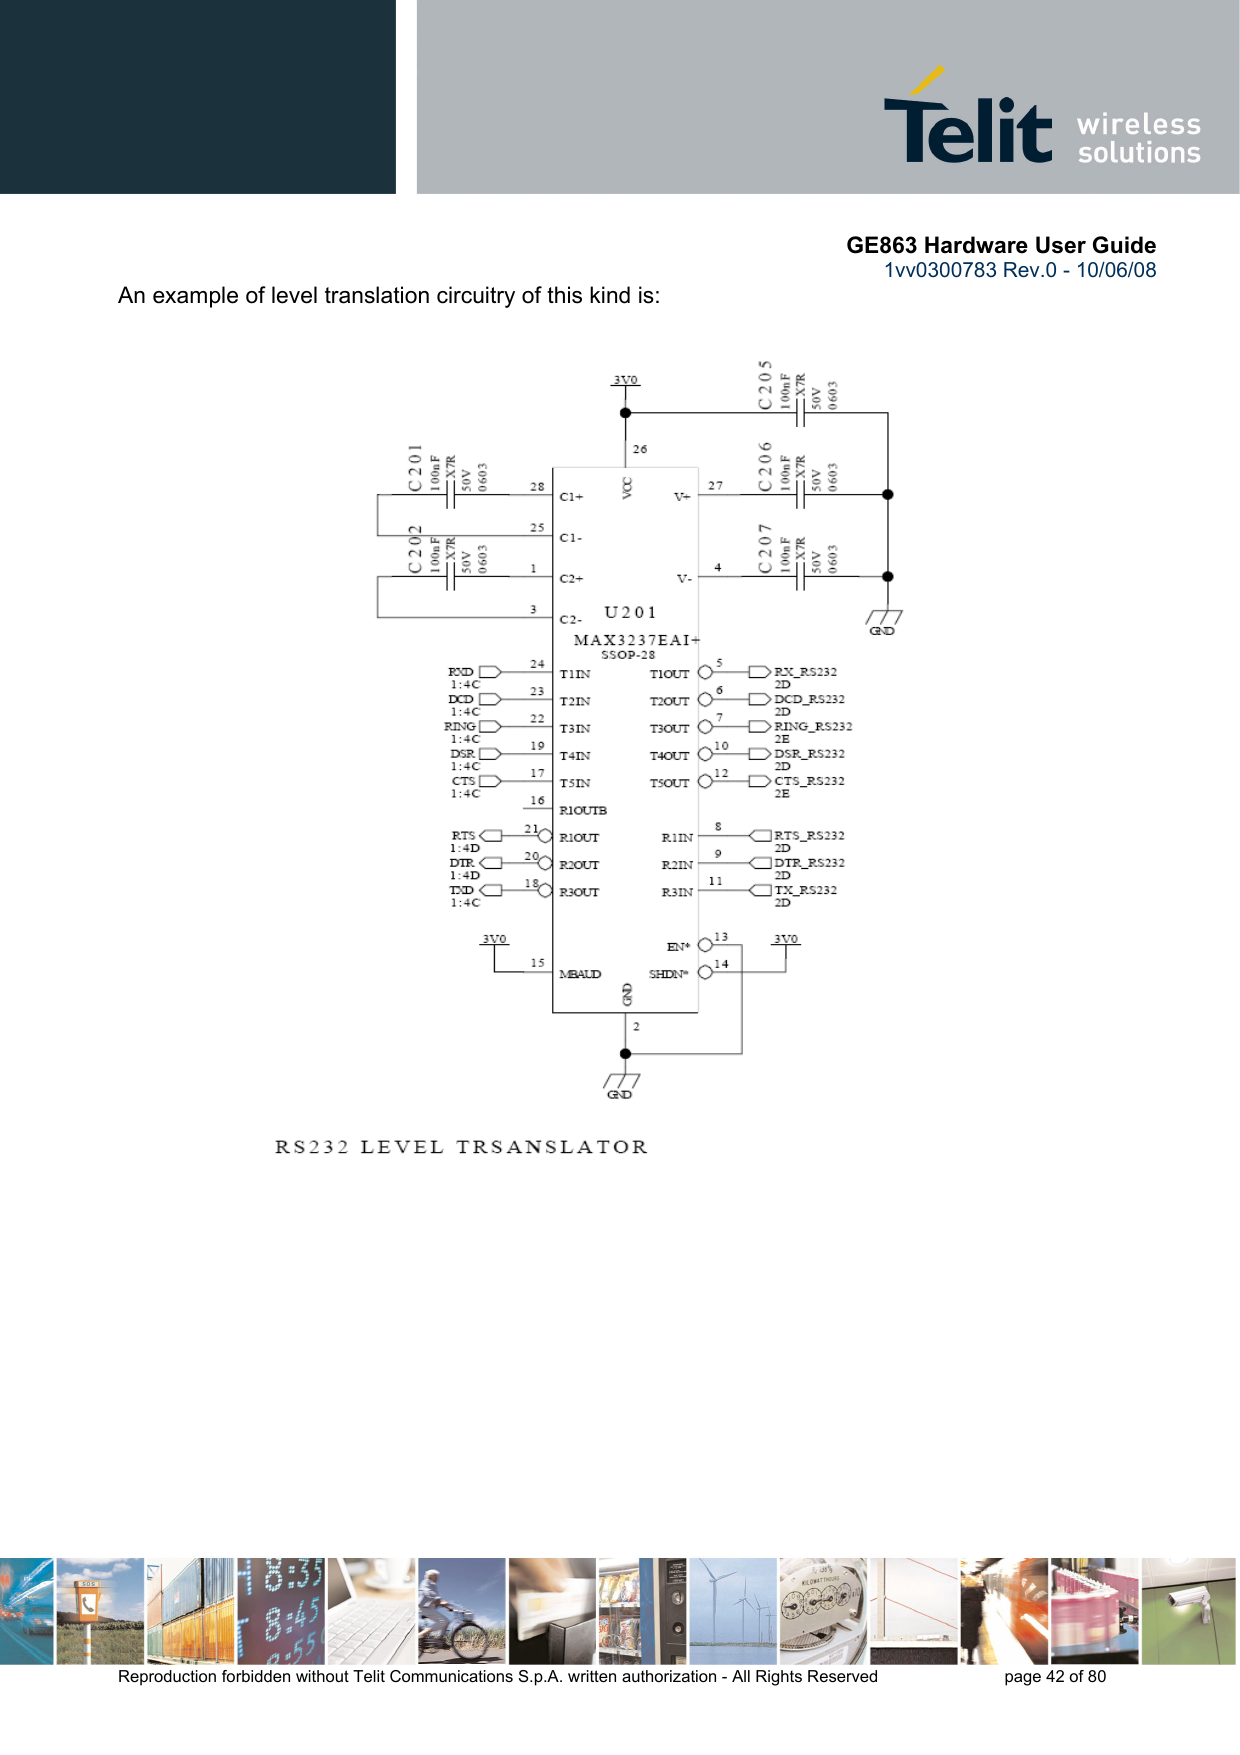       GE863 Hardware User Guide 1vv0300783 Rev.0 - 10/06/08 Reproduction forbidden without Telit Communications S.p.A. written authorization - All Rights Reserved    page 42 of 80  An example of level translation circuitry of this kind is:    